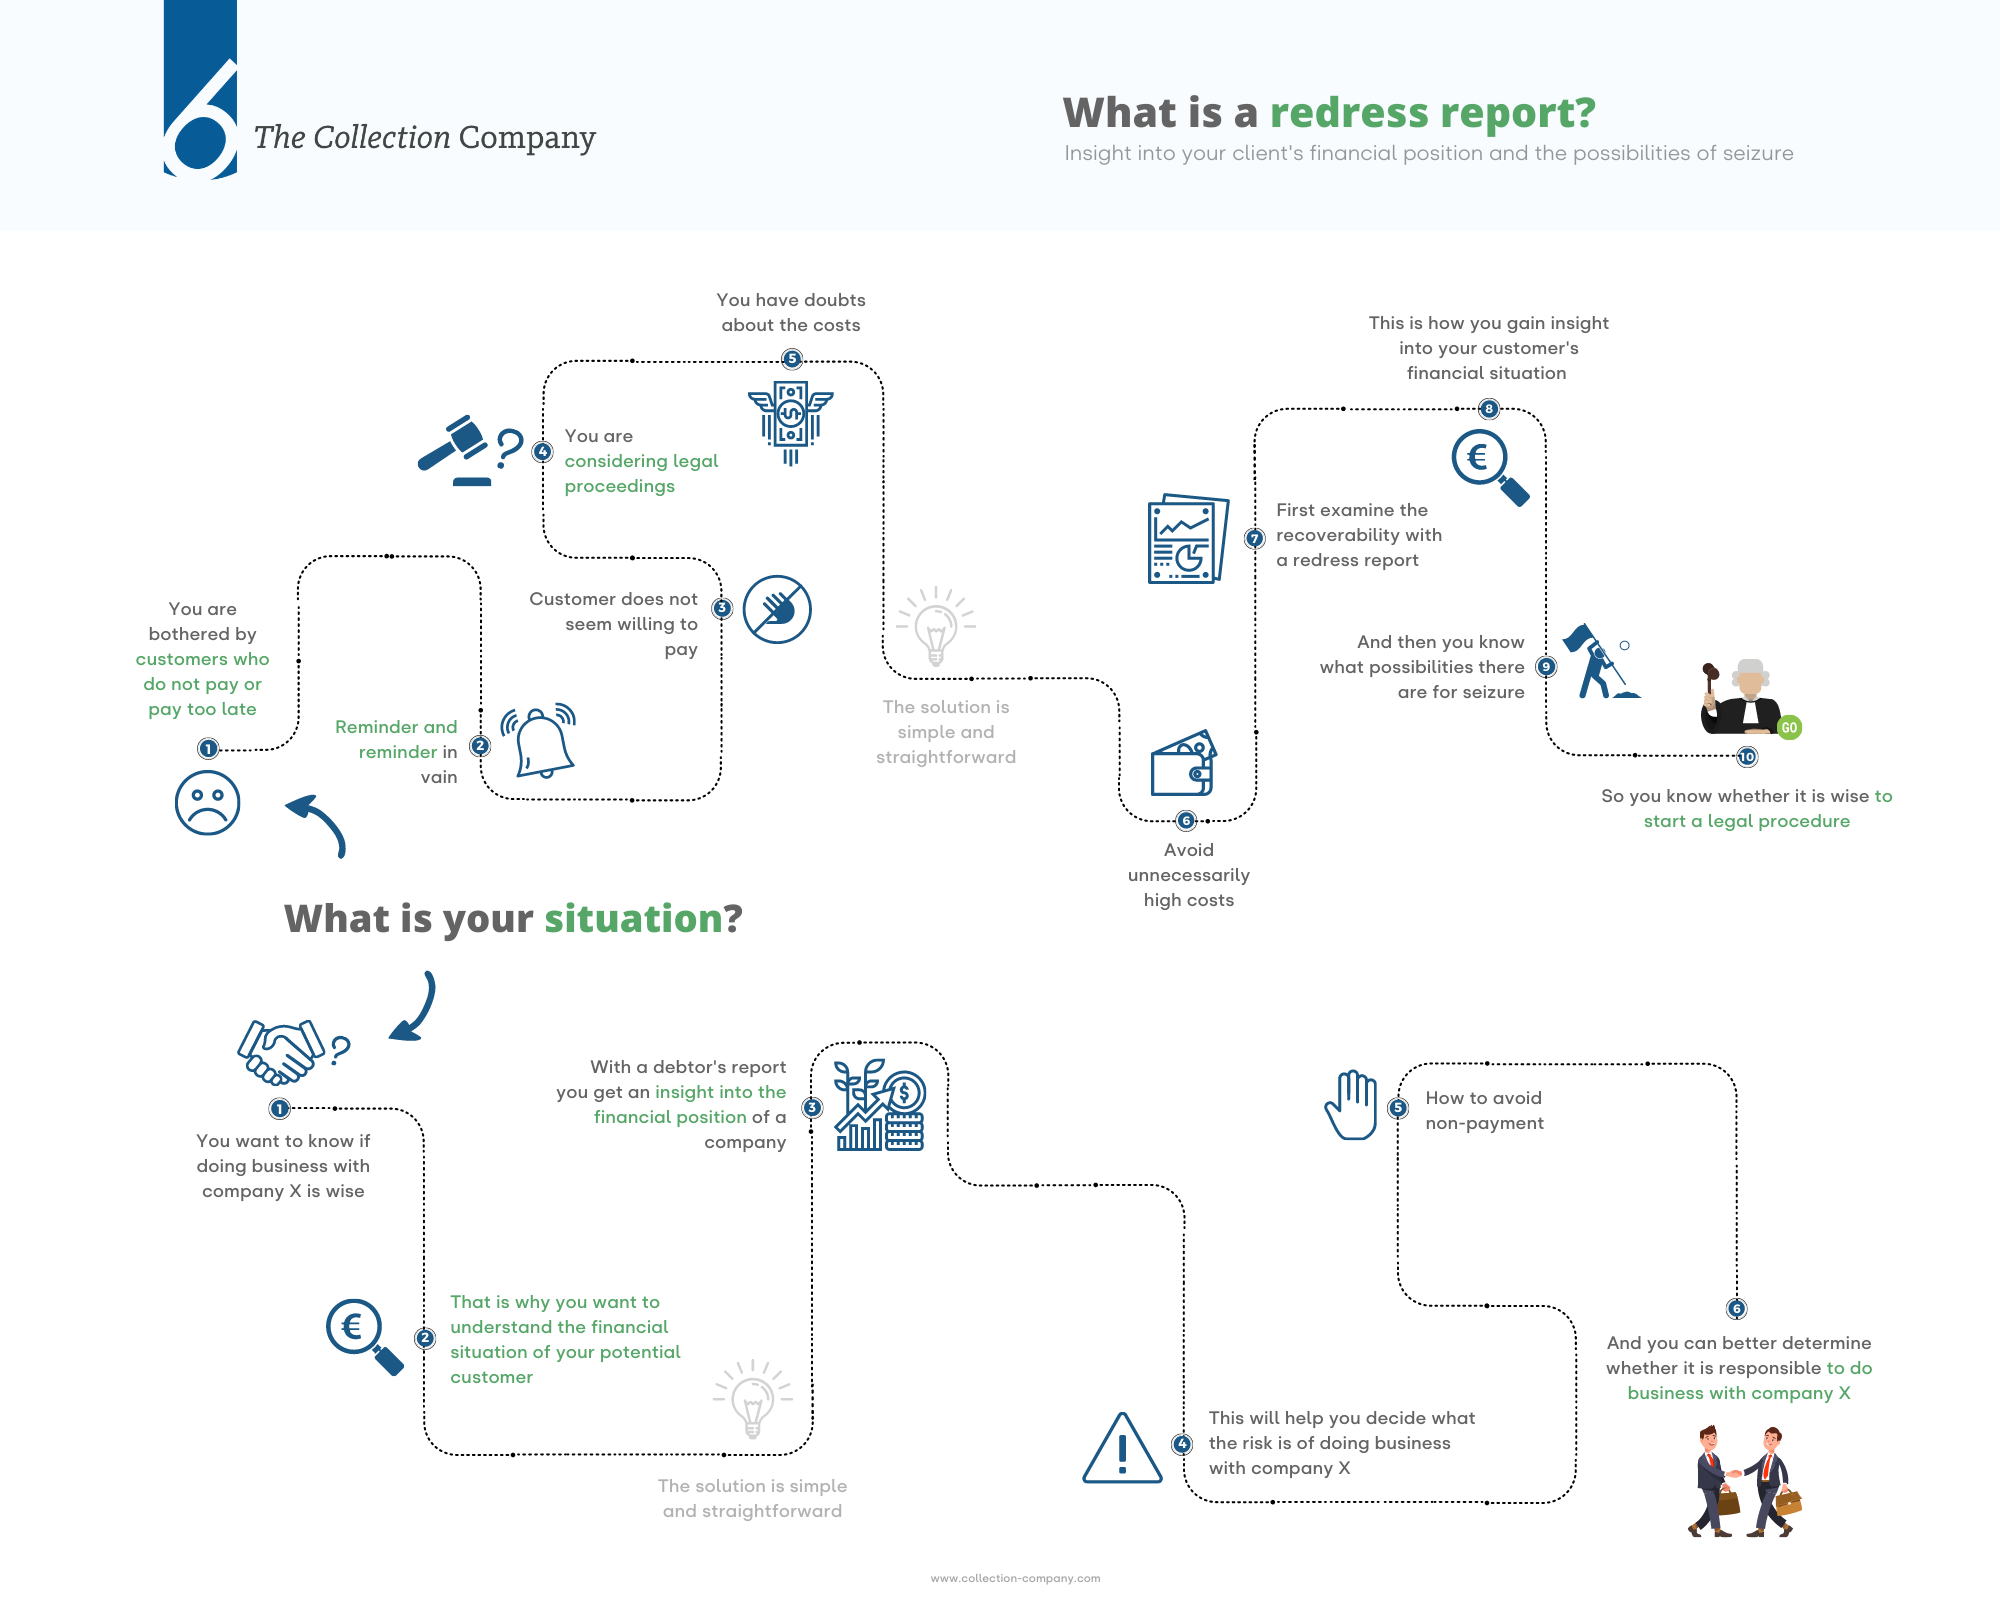 What is a redress report?